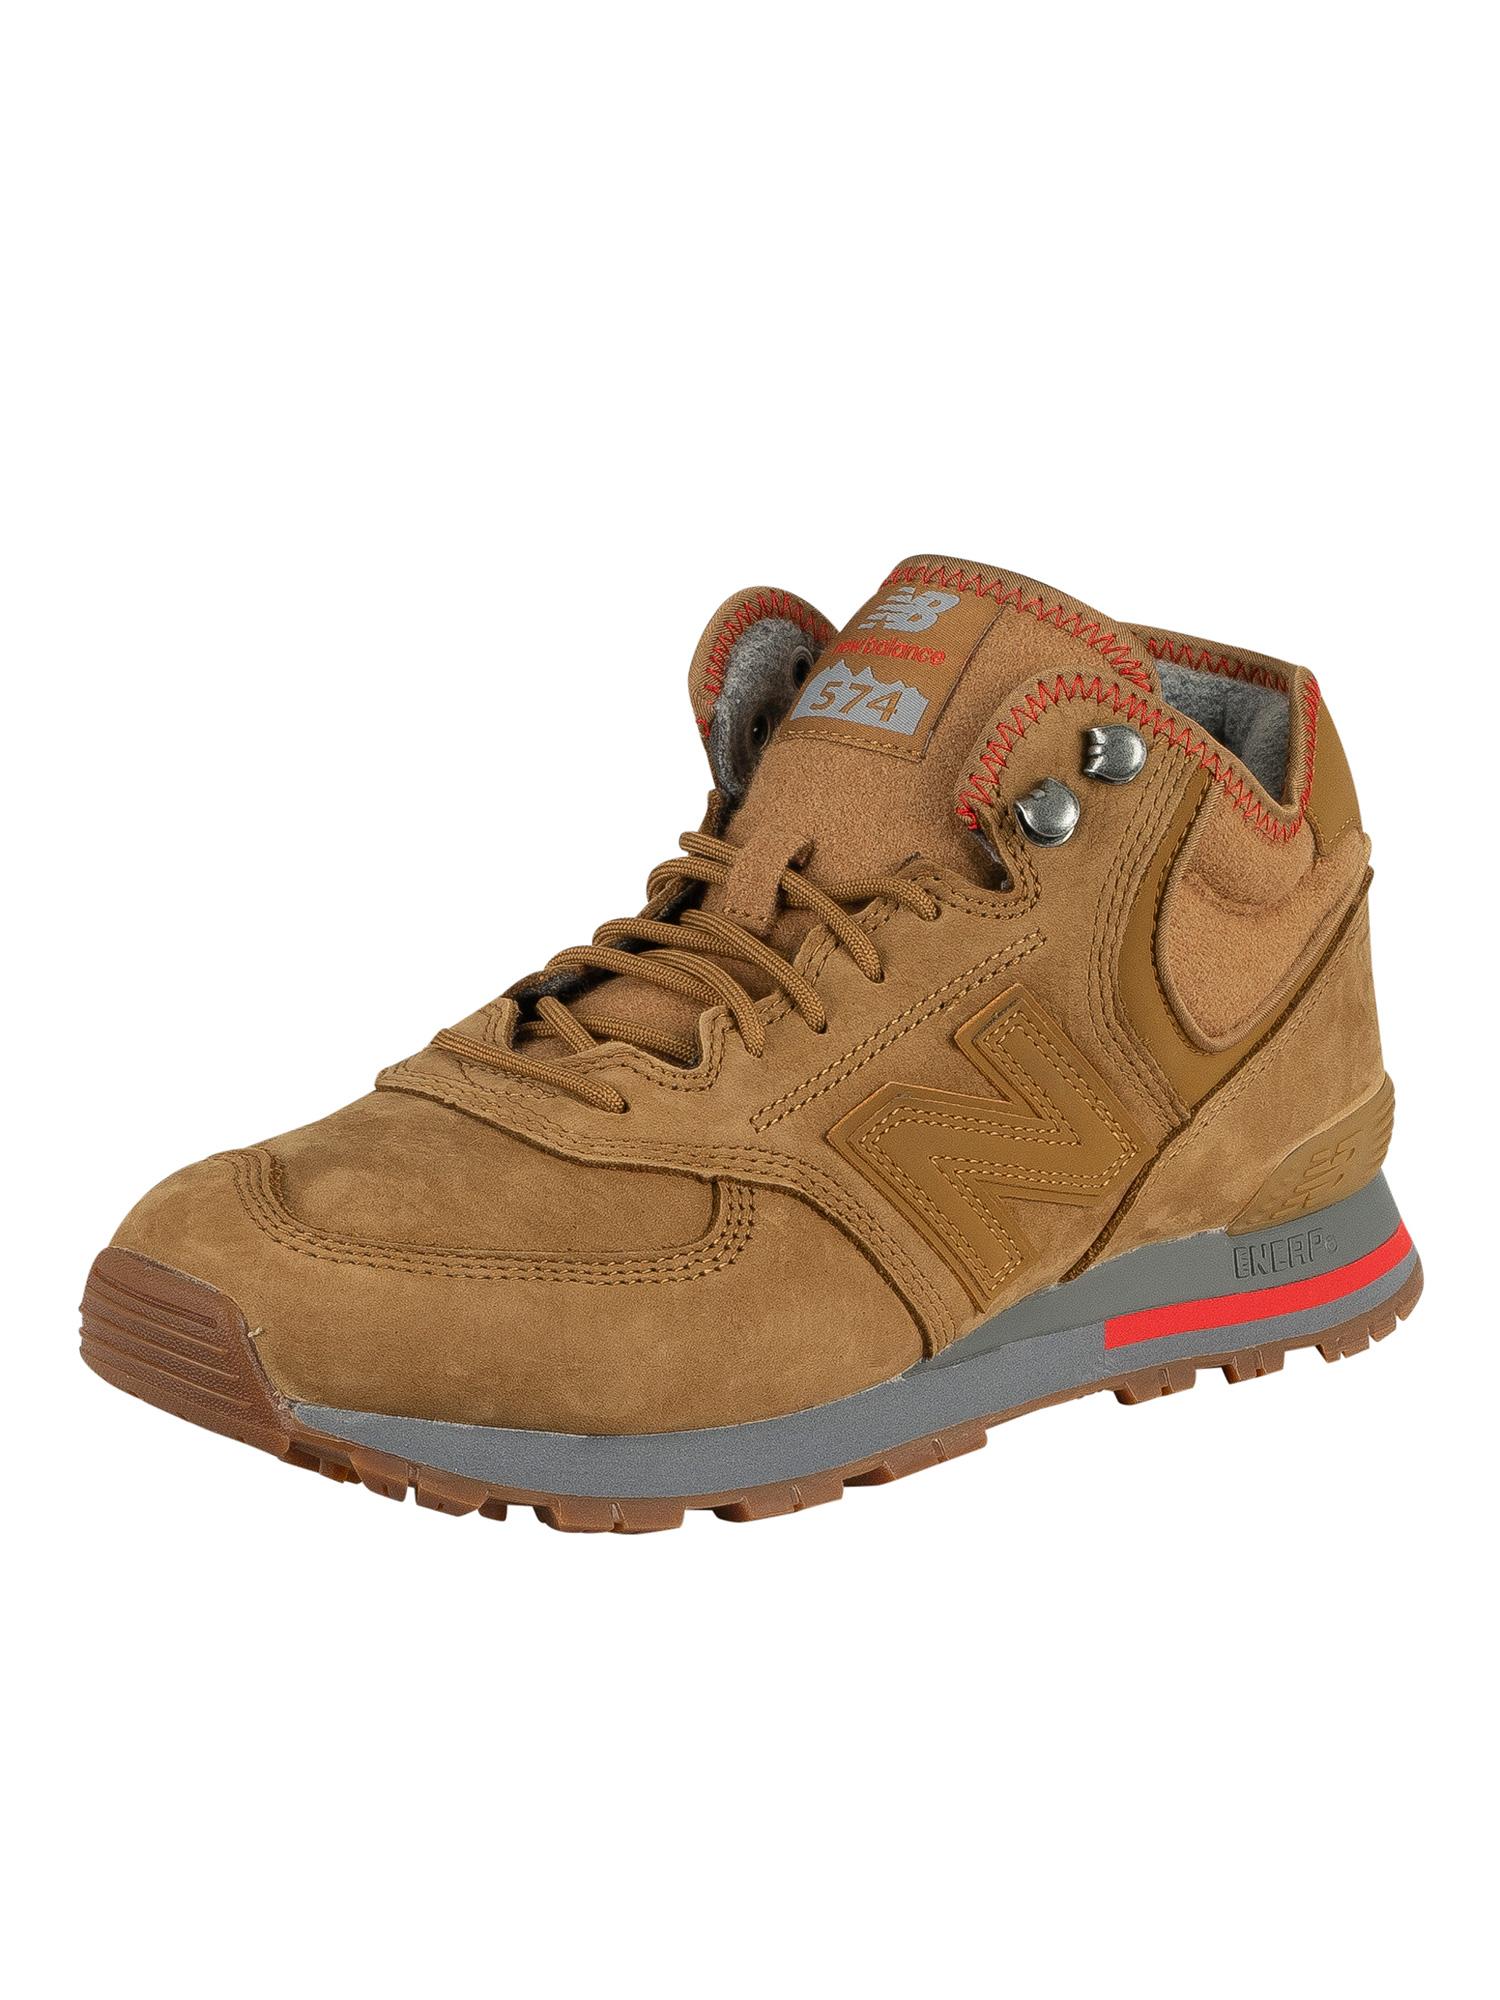 New Balance 574 Mid Premium Hiker Trainers In Brown For Men | Lyst Australia